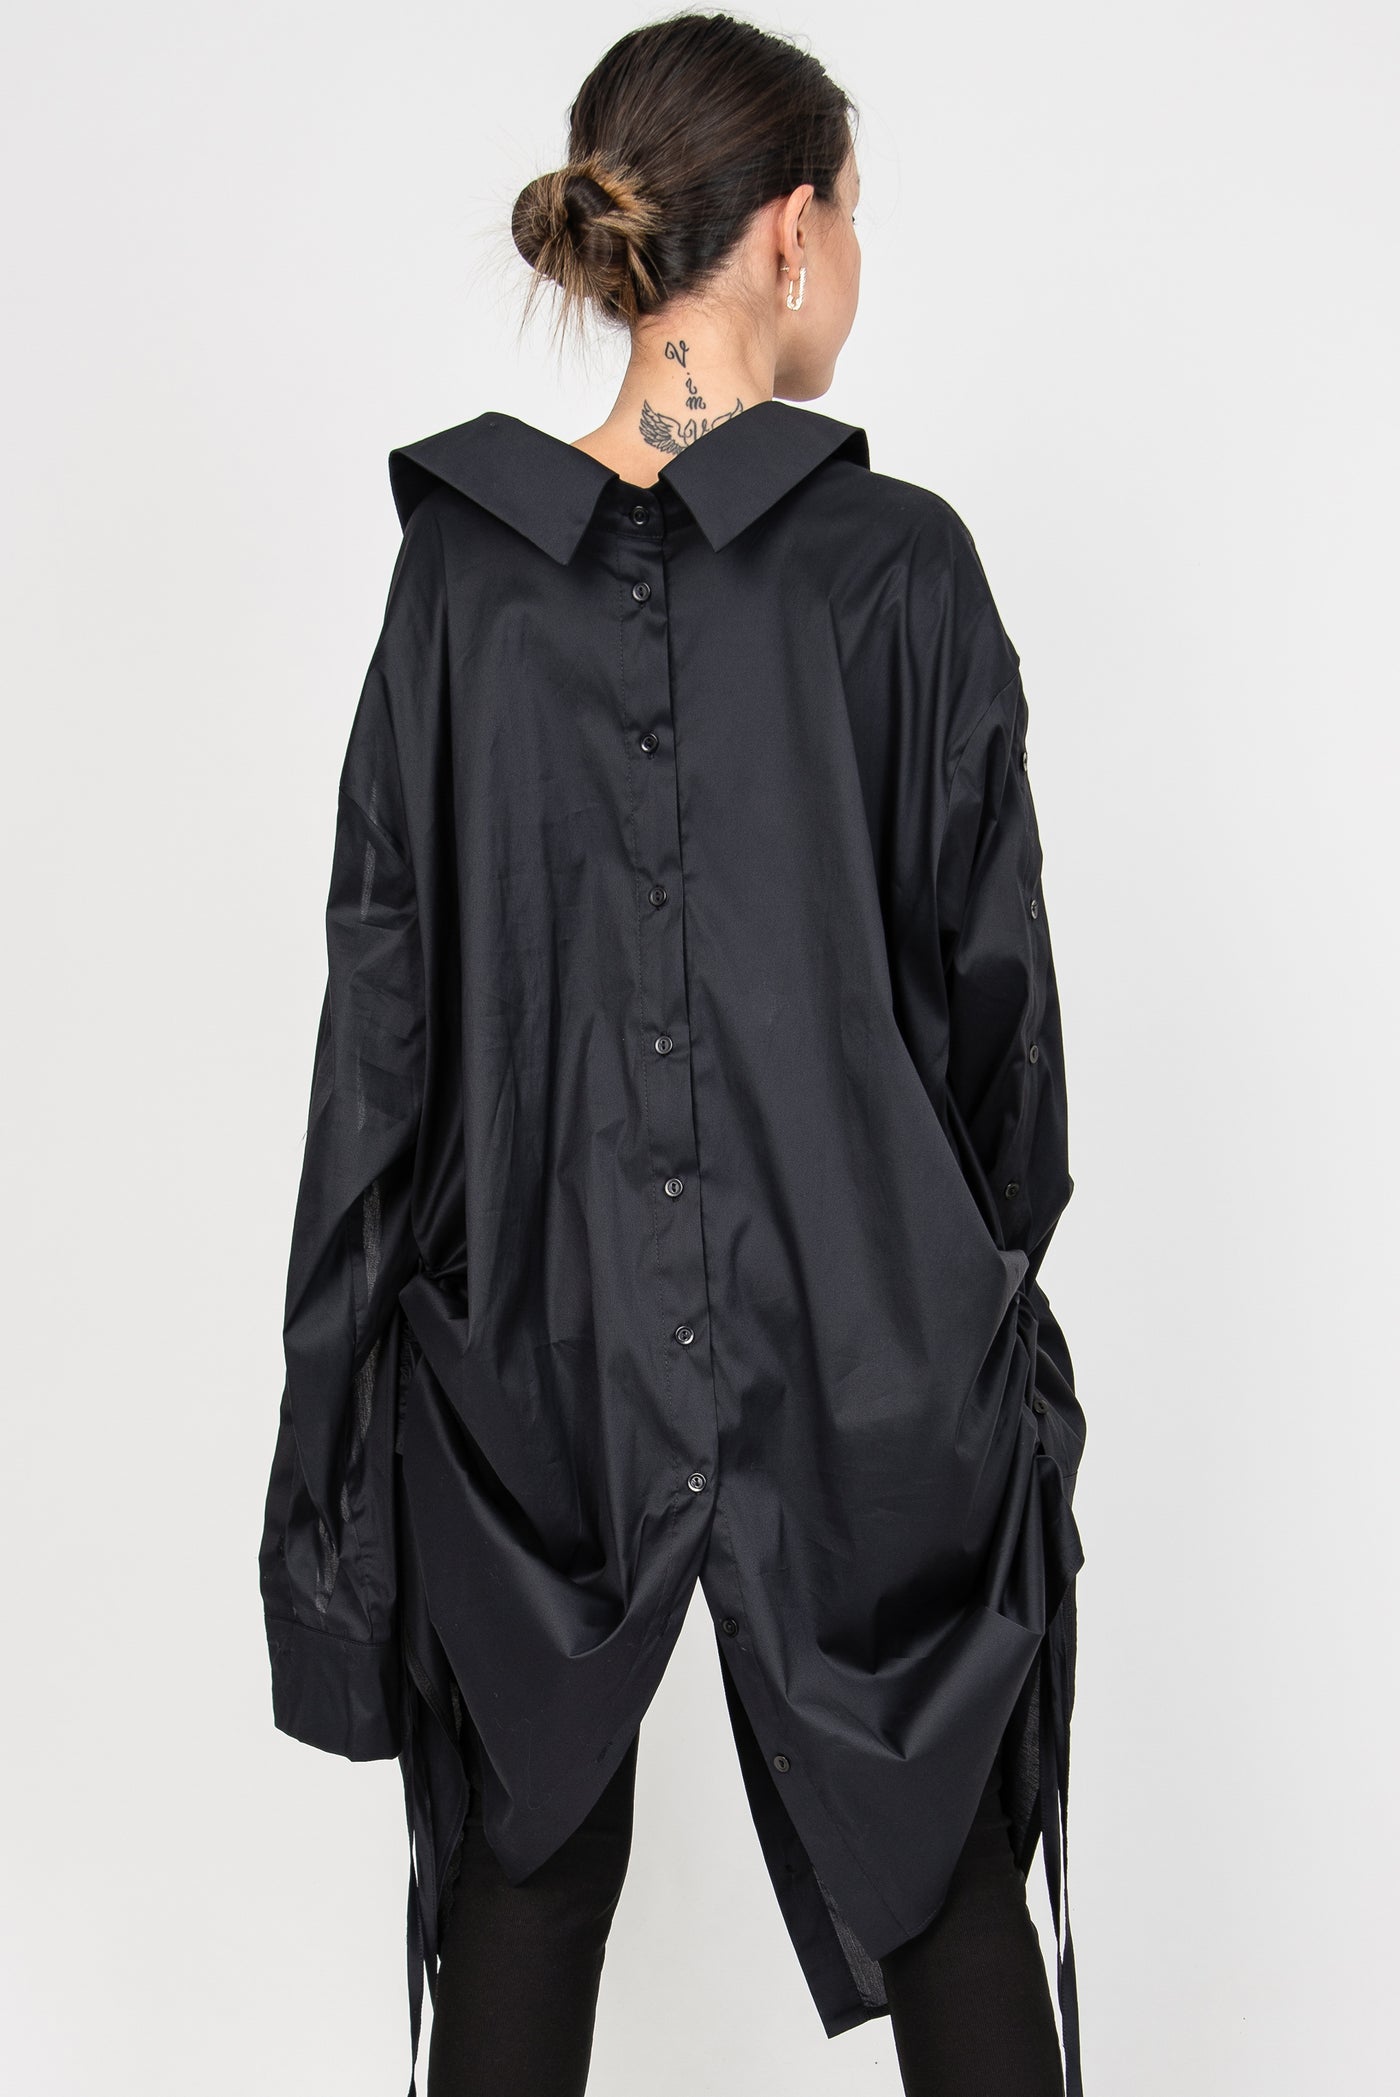 Black oversized shirt with ties F2348